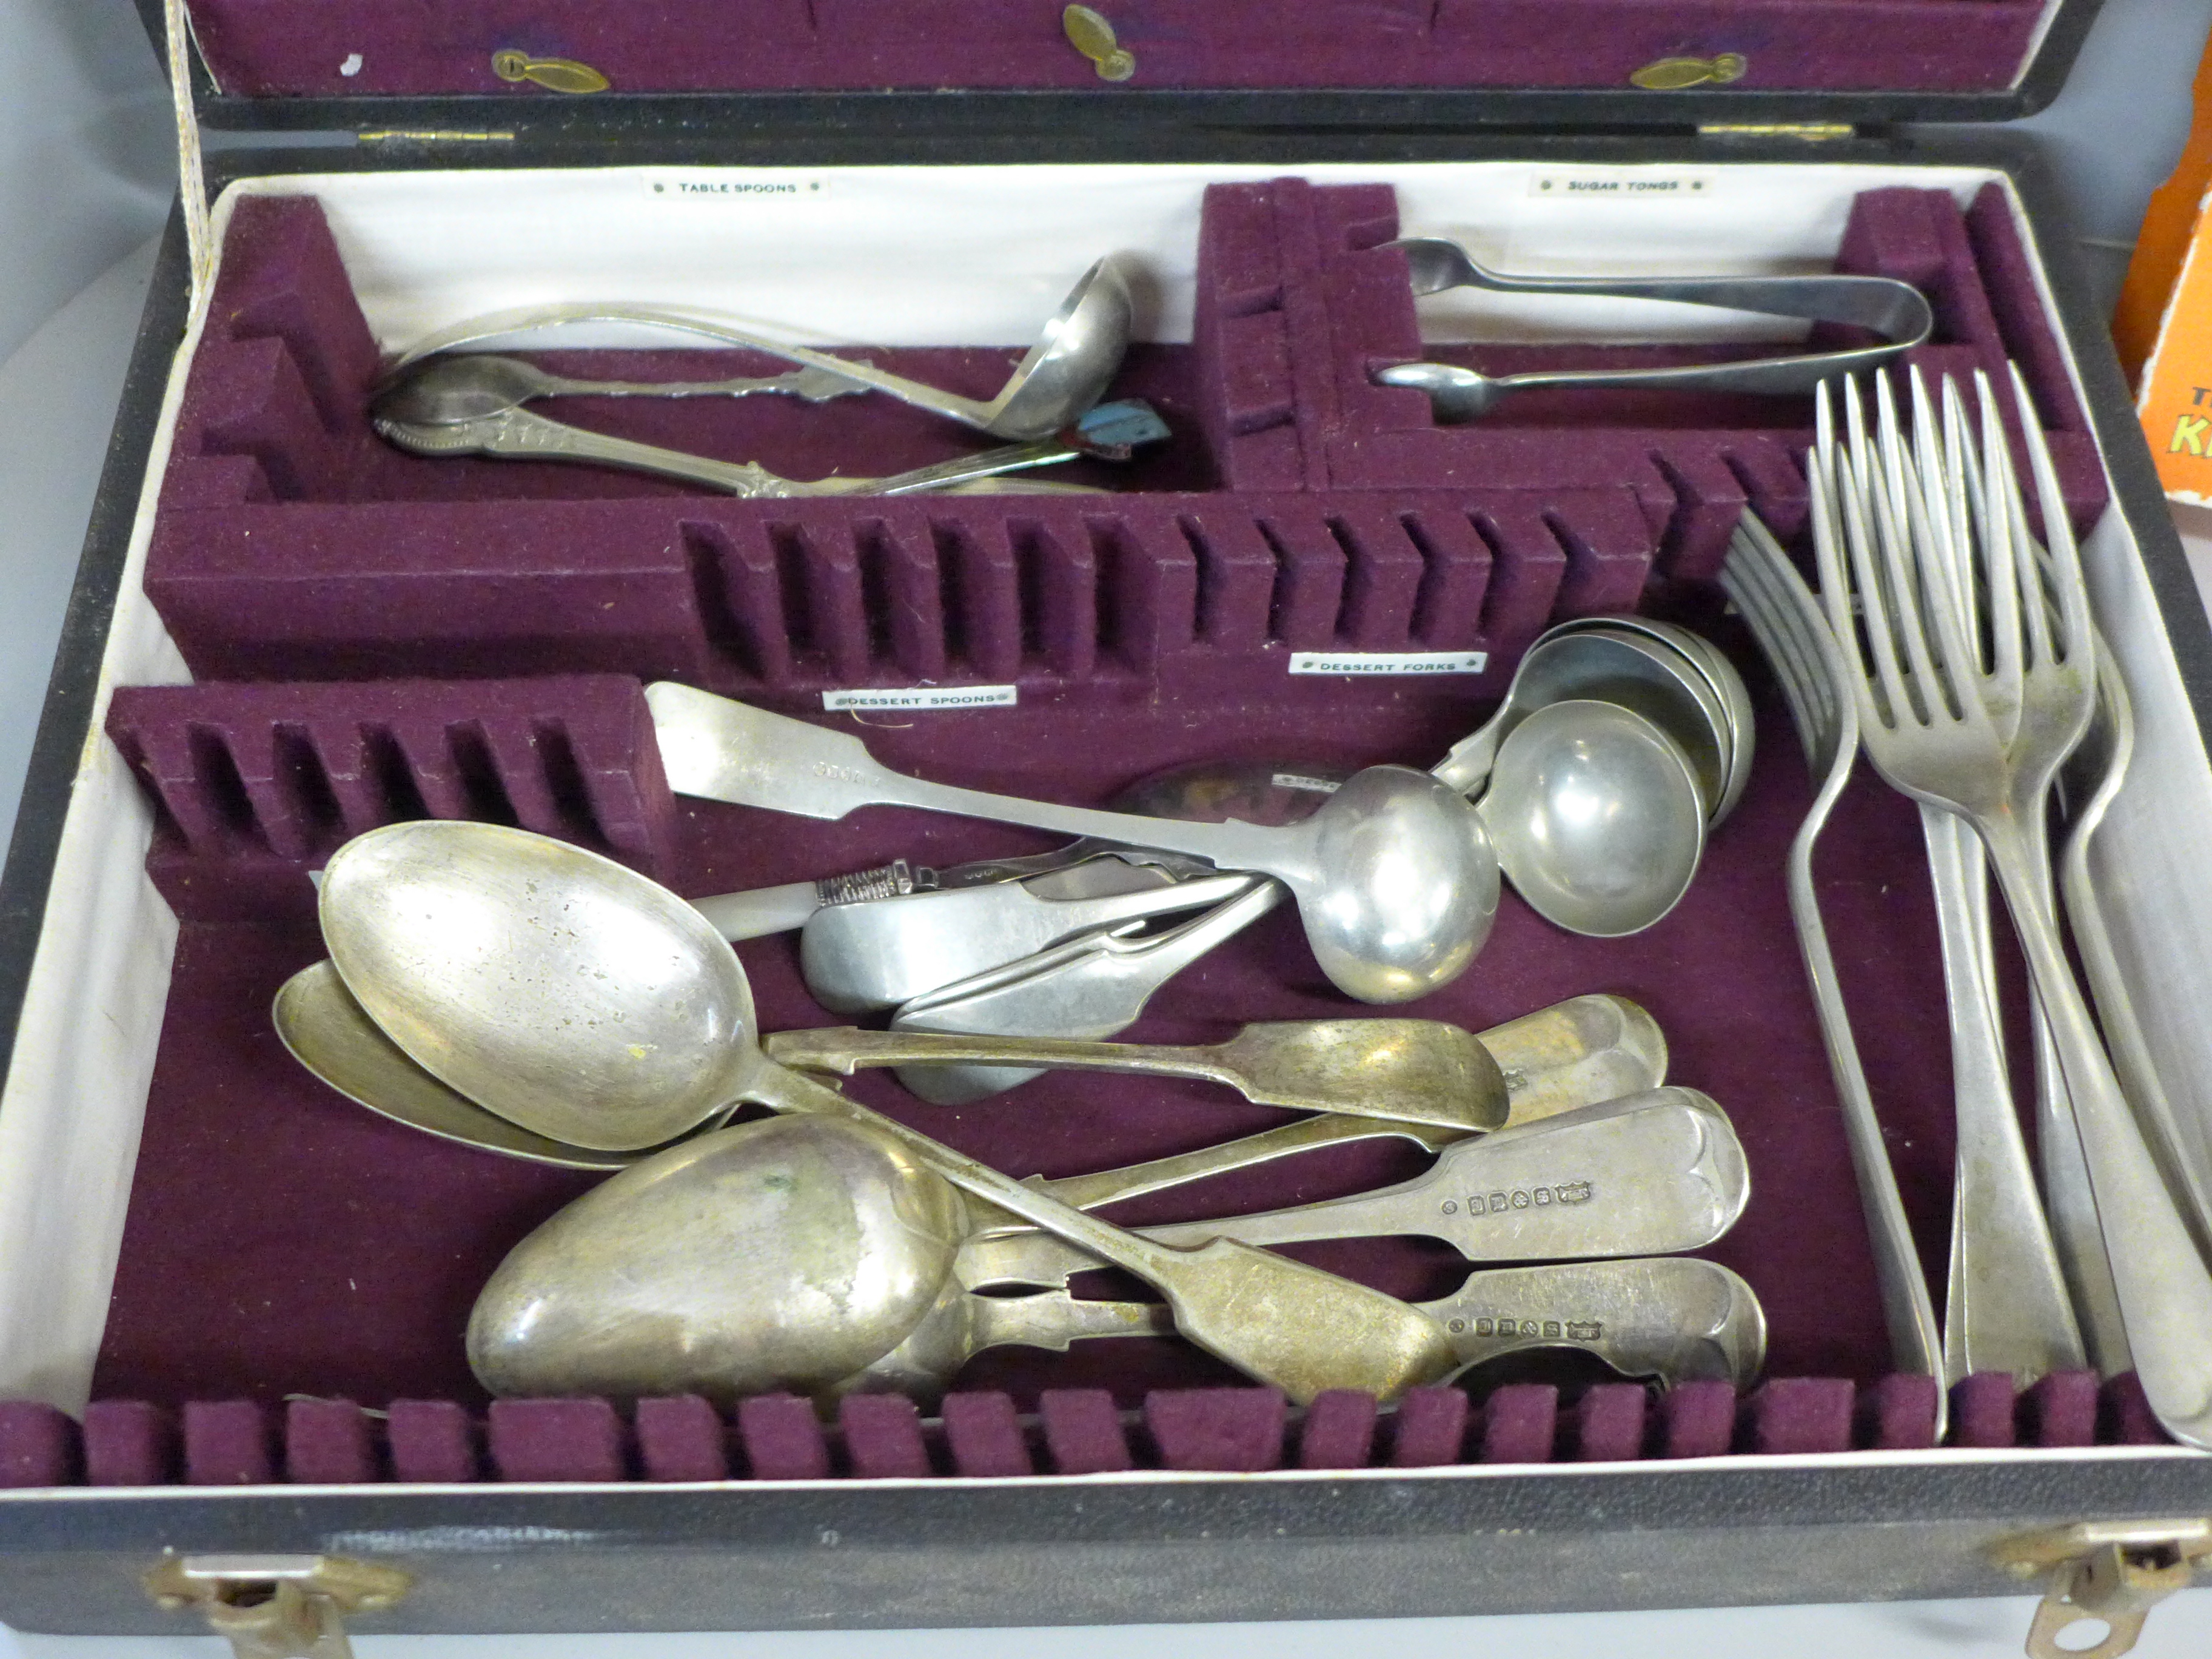 A collection of flatware and a boxed The Lucie Attwell Kiddy's Cutlery set, boxed - Image 3 of 3